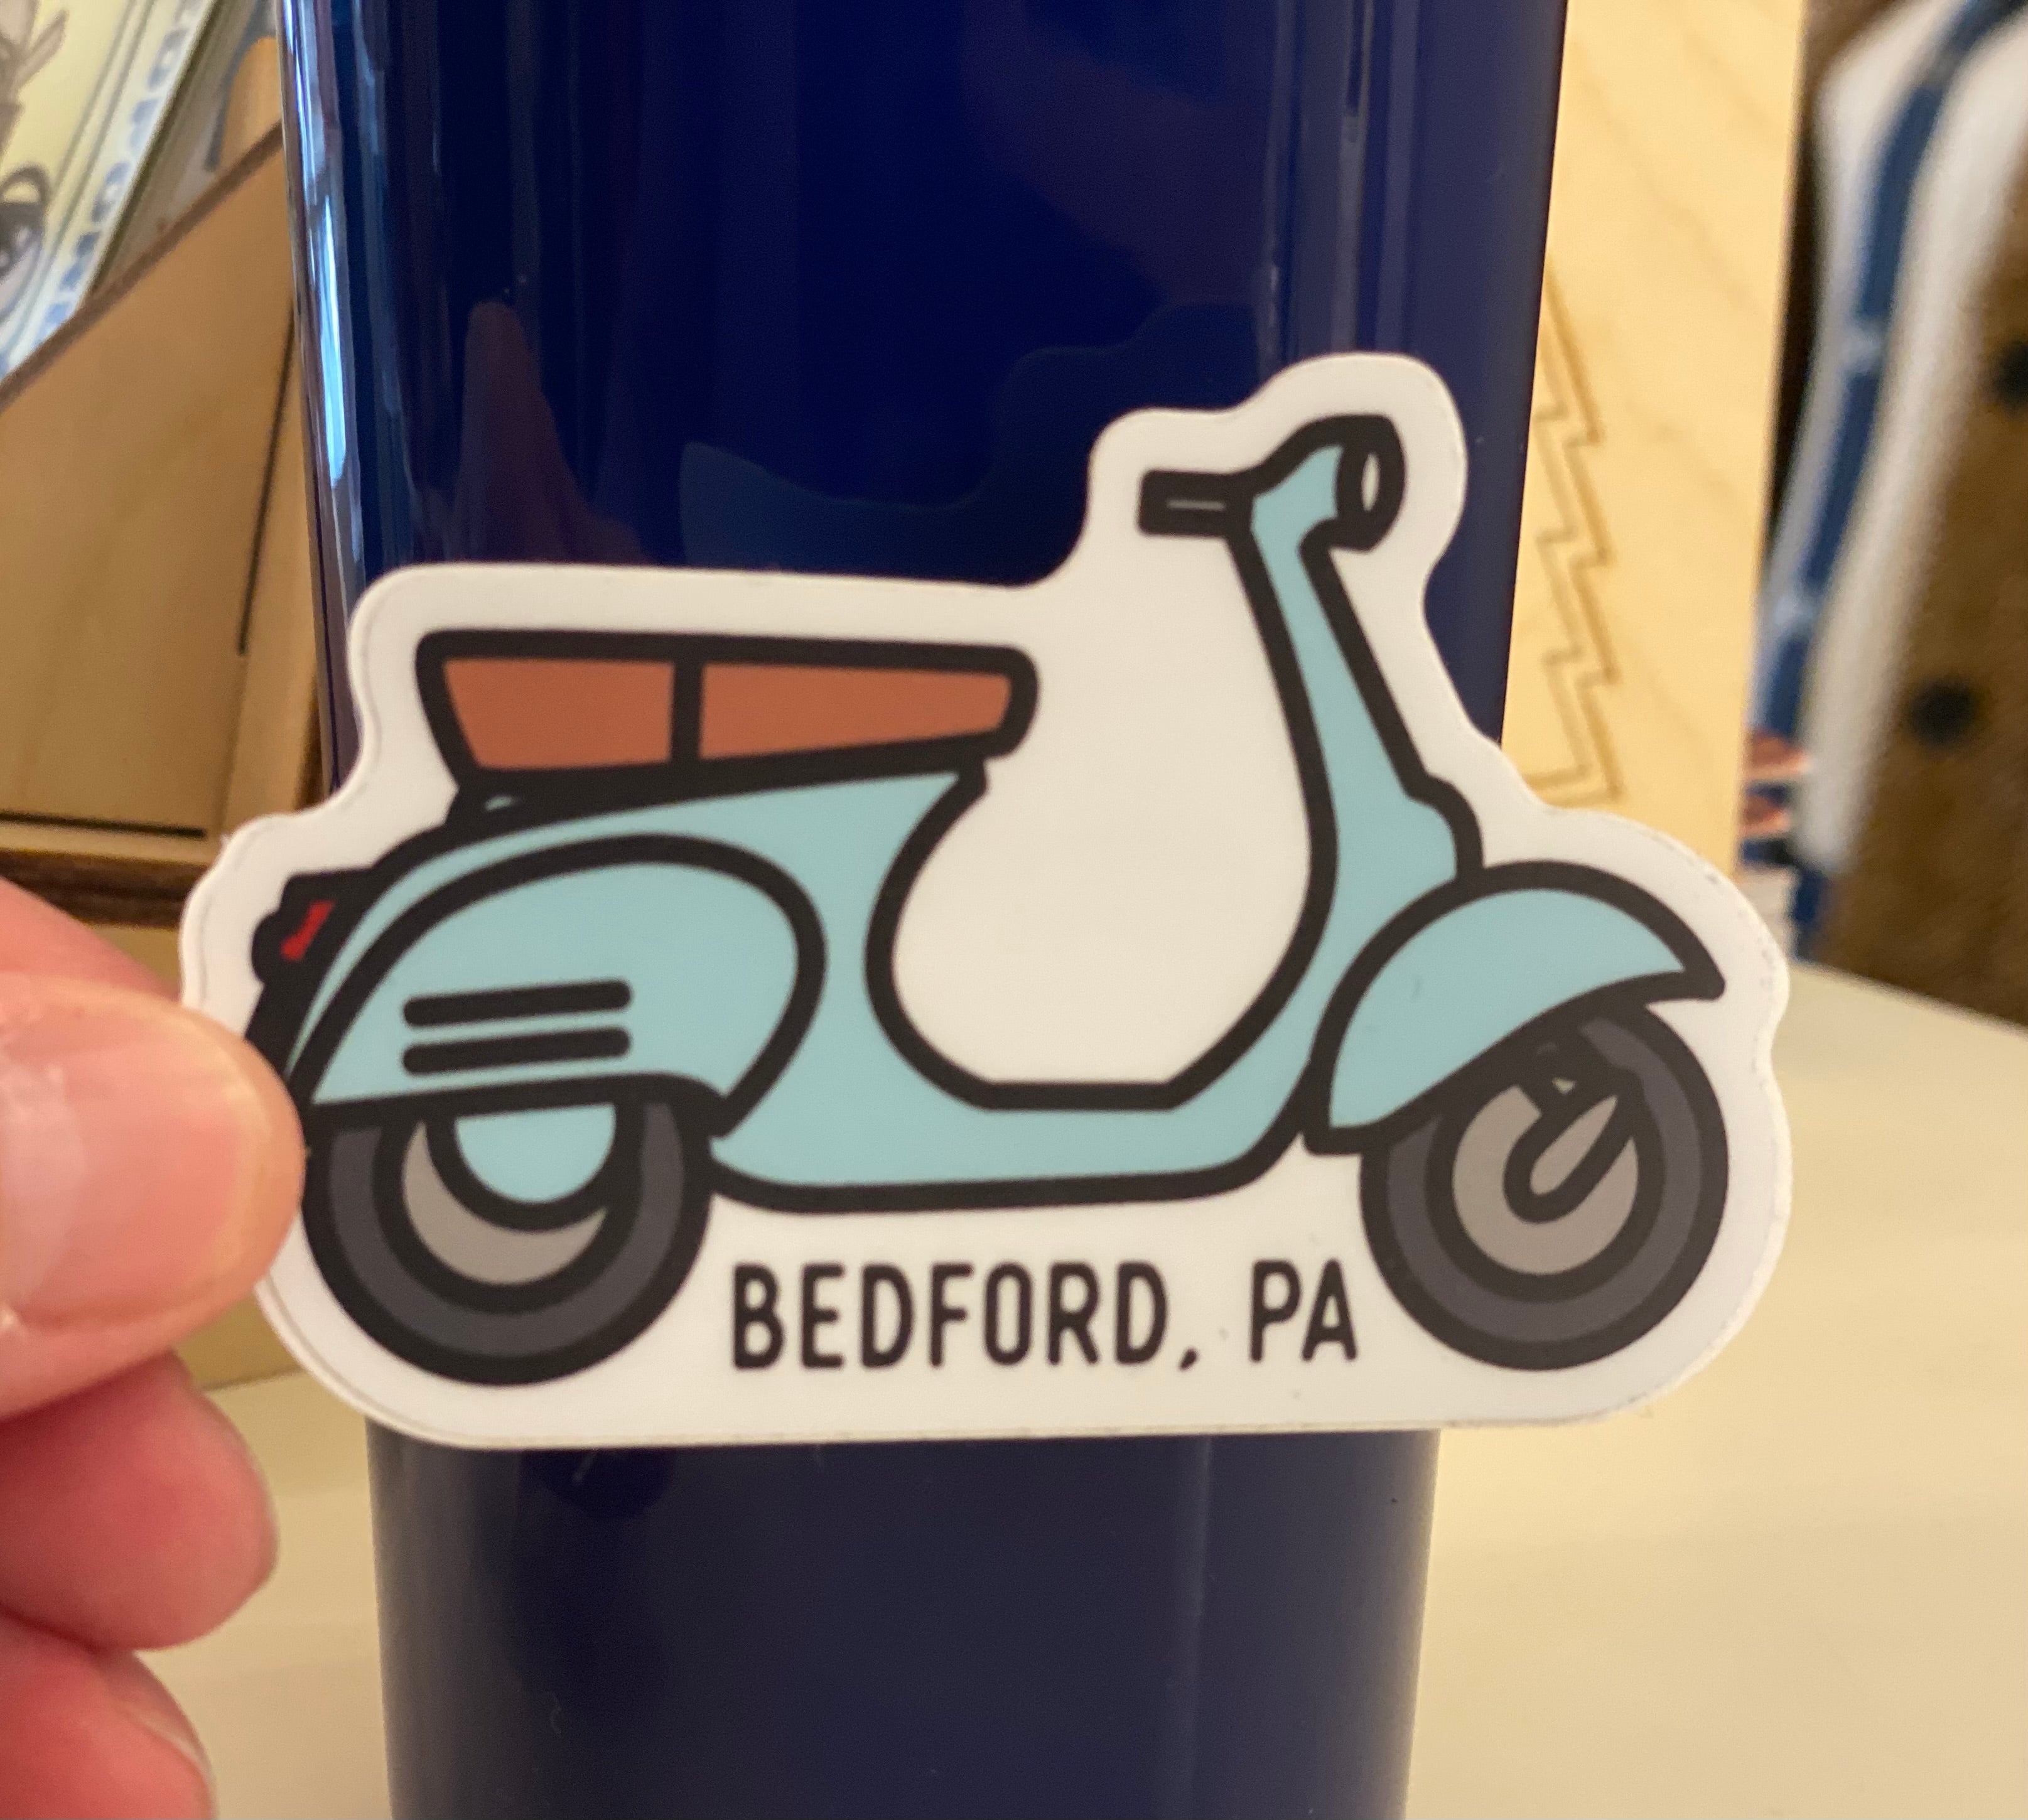 Blue Scooter Bedford, PA Sticker